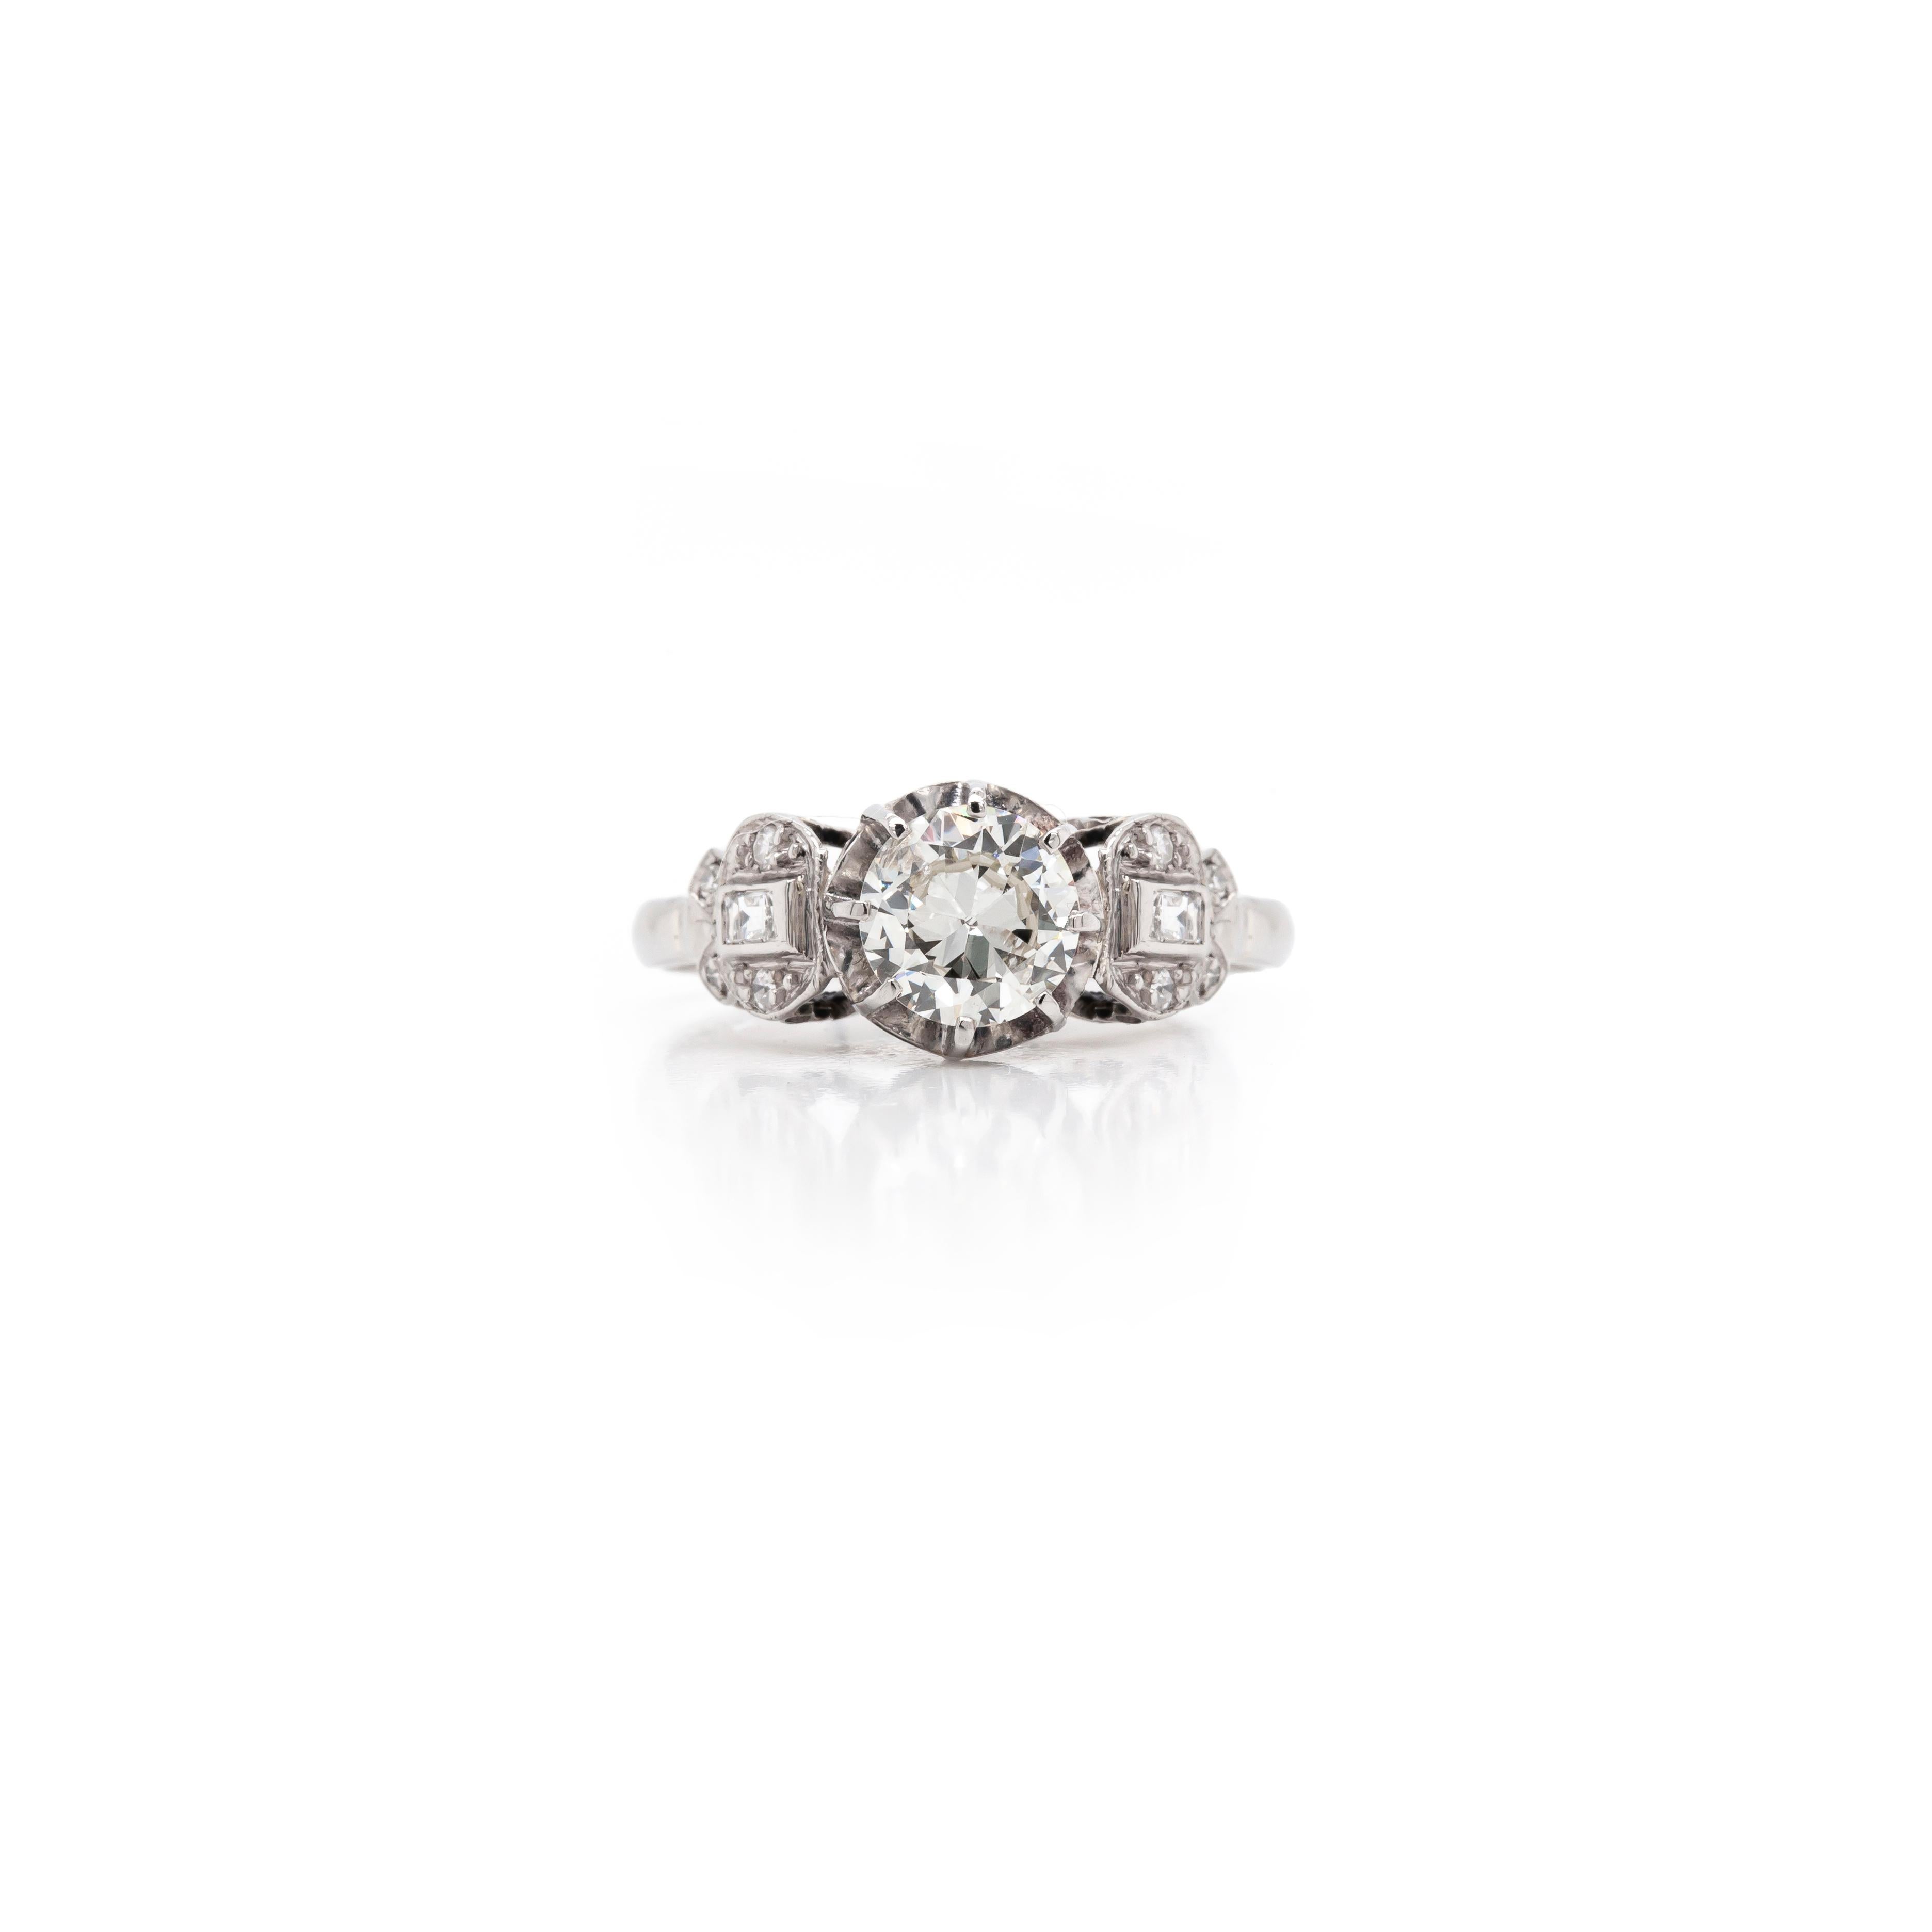 This stunning 1930s engagement ring features a beautiful 1.05 carat transitional cut diamond in the centre, accompanied on either side by a baguette cut diamond set within four old European cut diamonds (a total of five diamonds on each shoulder). 